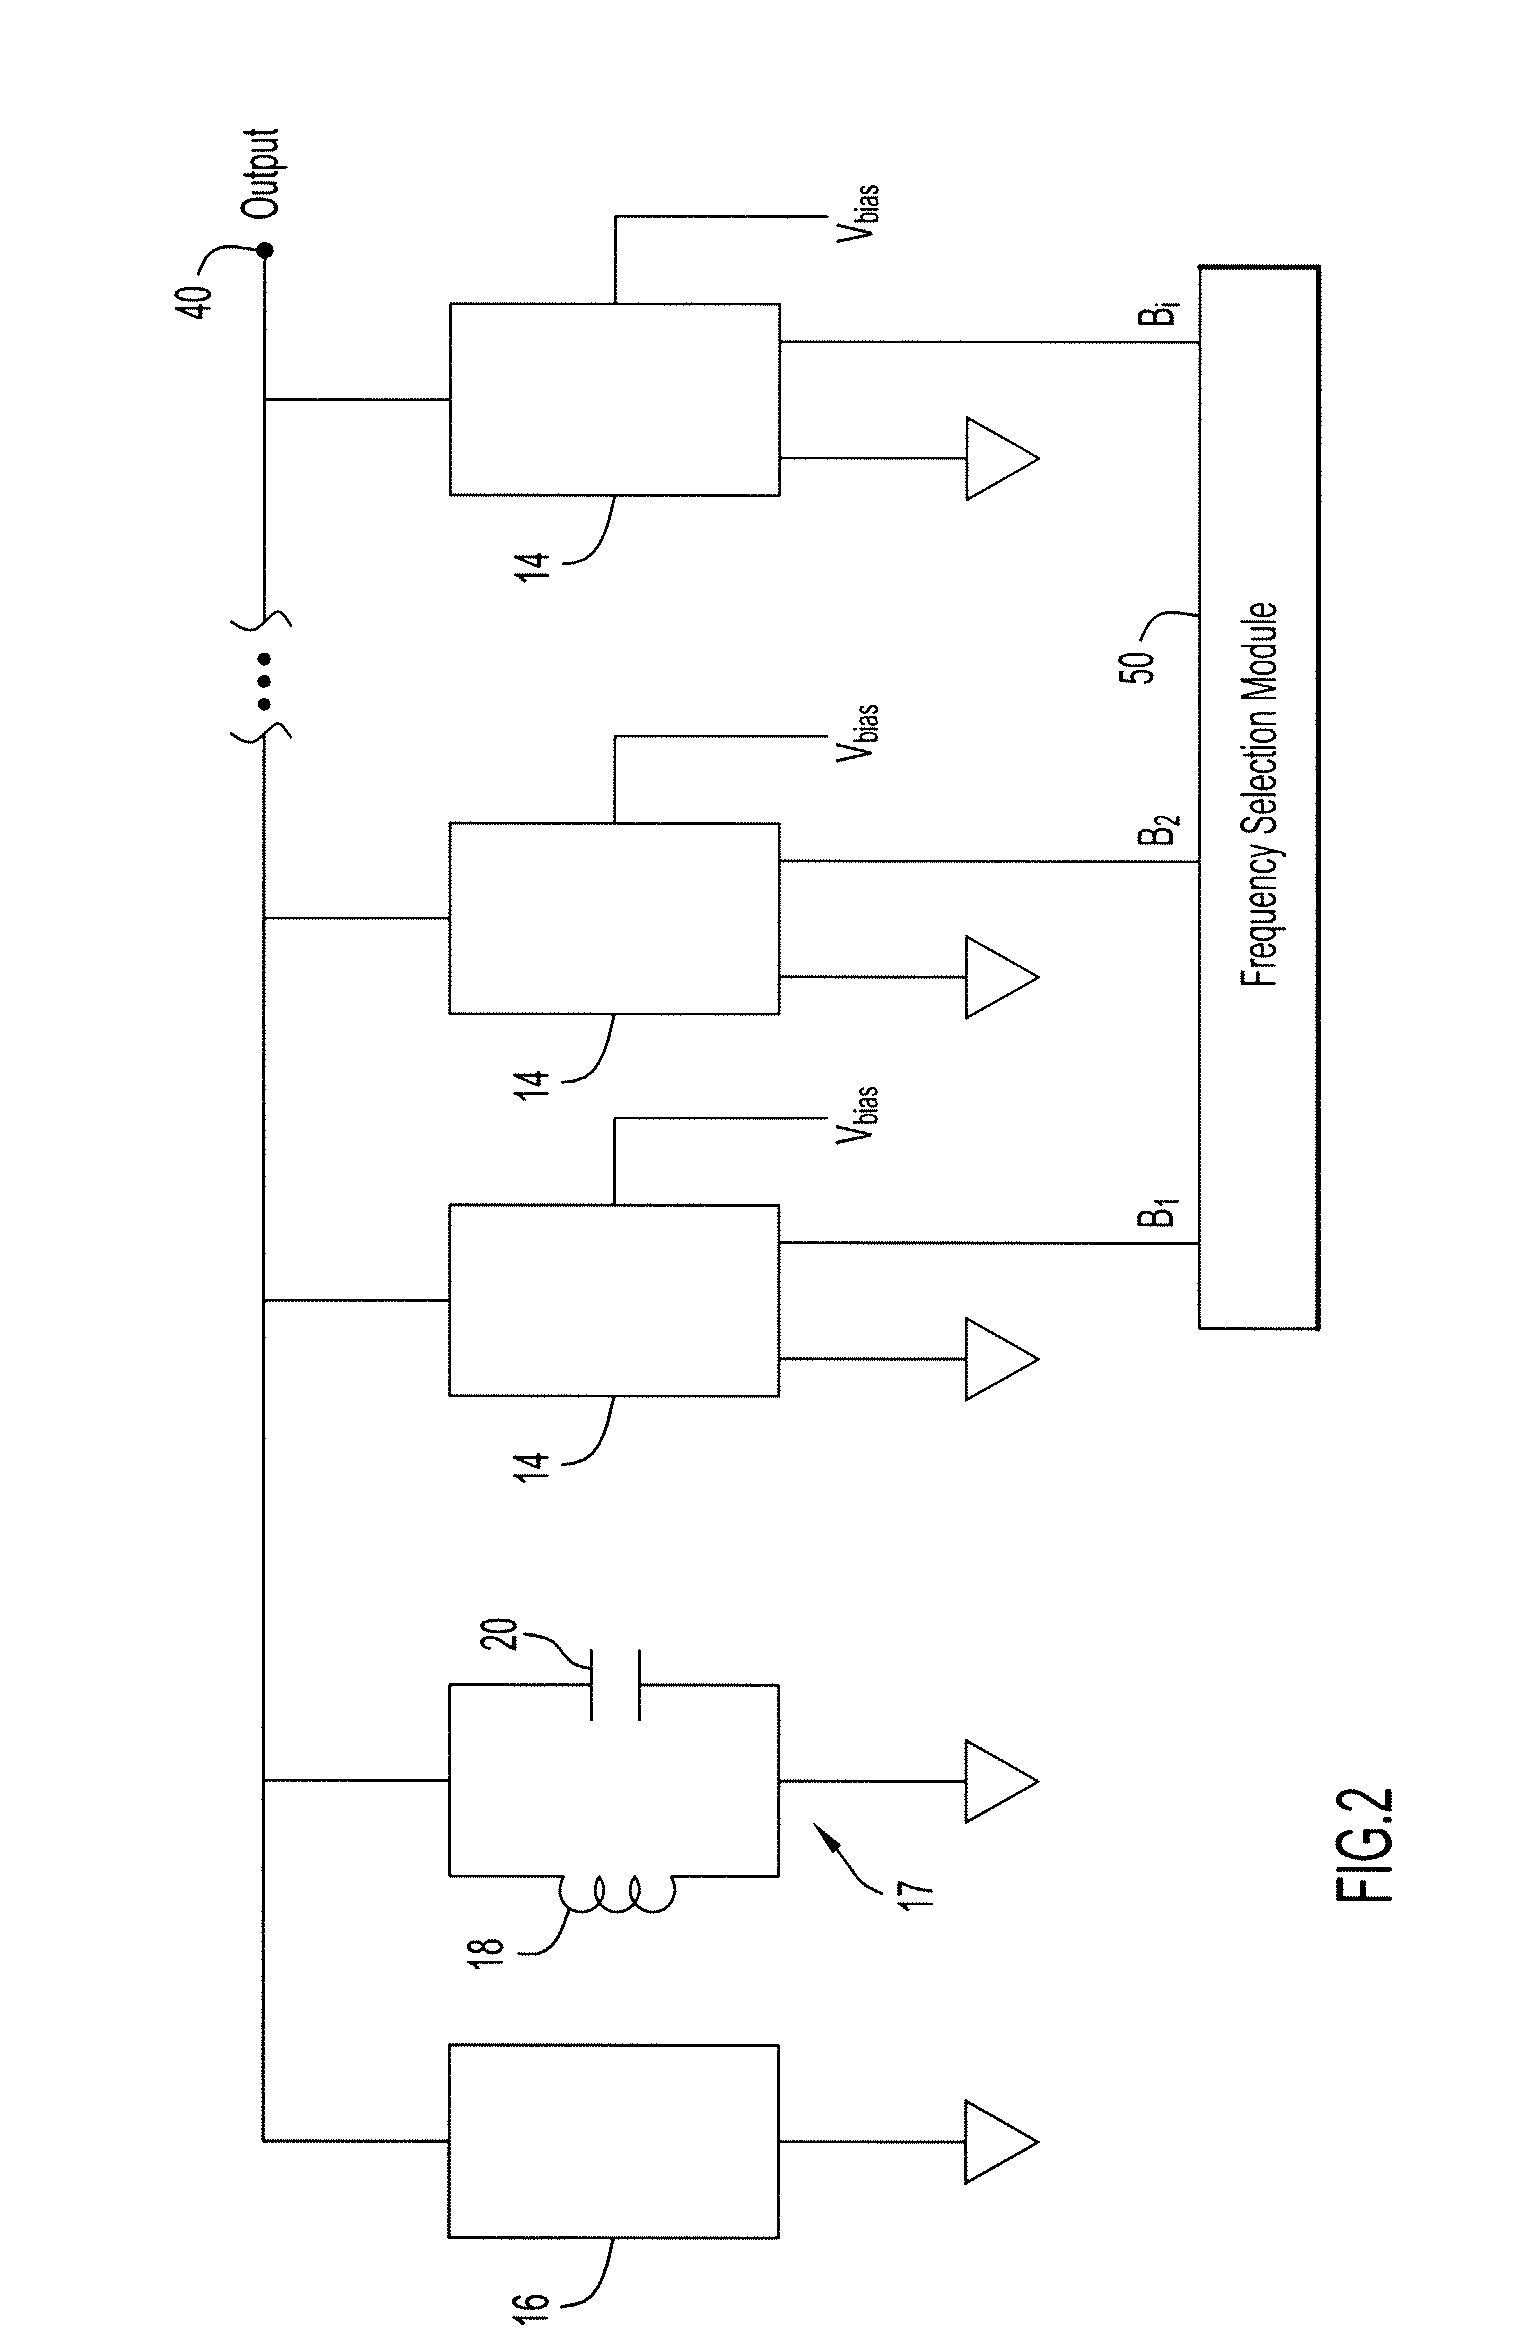 Apparatus and method for digitally controlling capacitance